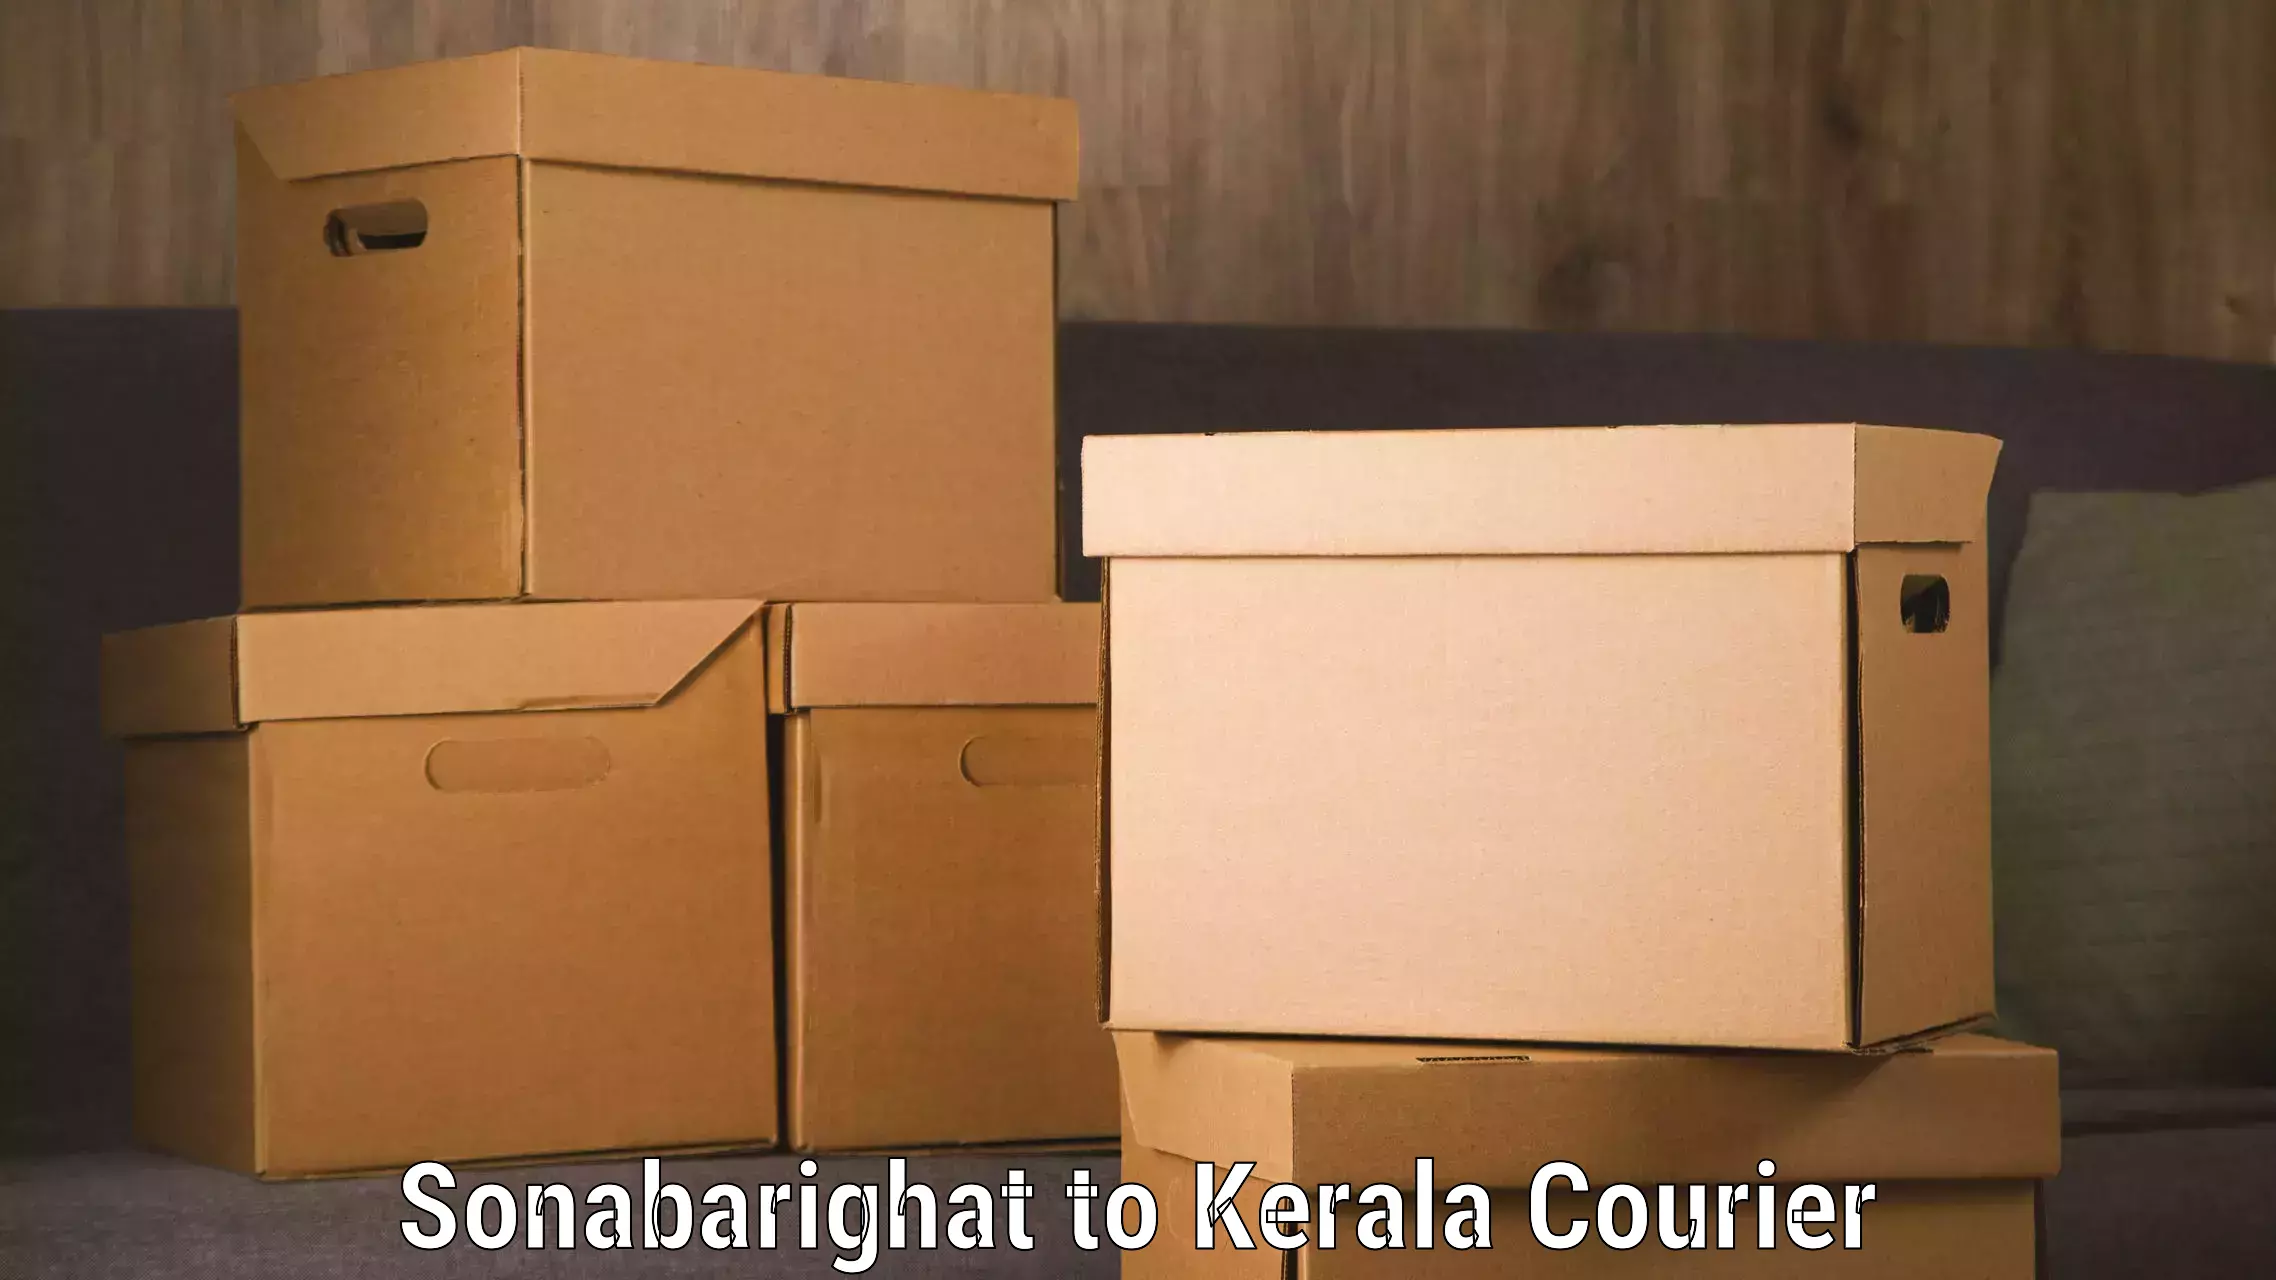 Unaccompanied luggage service Sonabarighat to Cochin University of Science and Technology